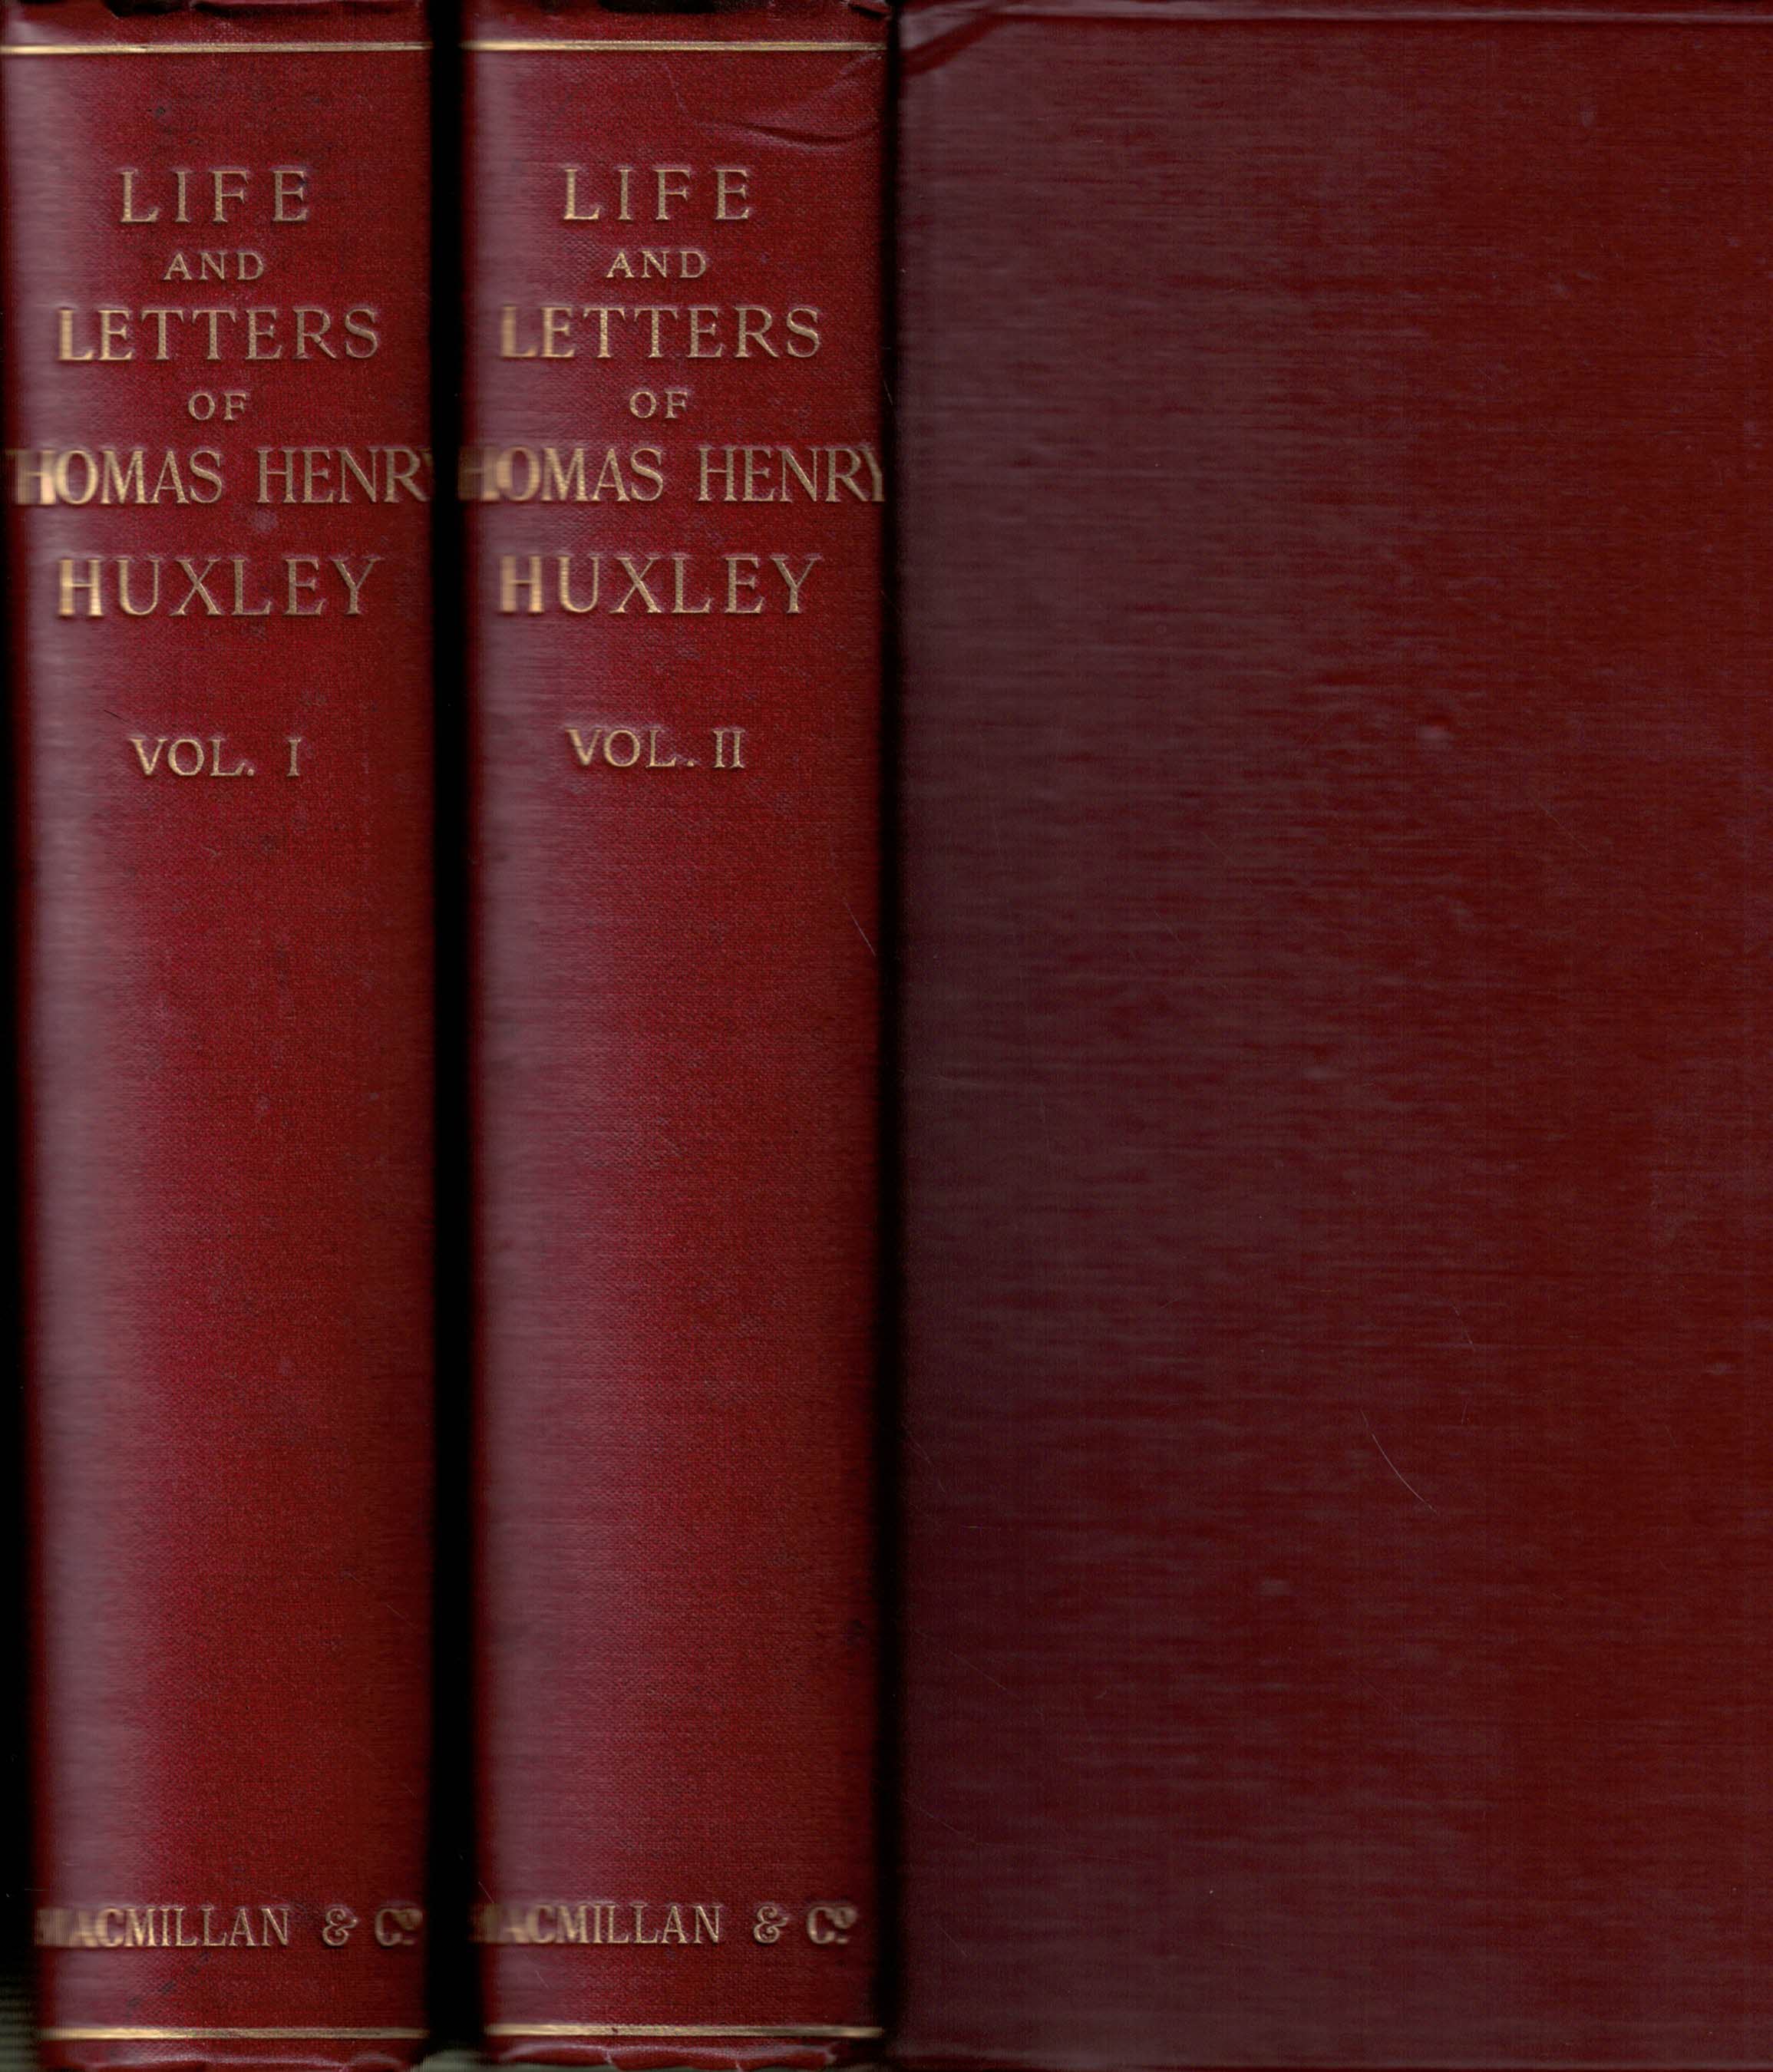 Life and Letters of Thomas Henry Huxley. 2 volume set.